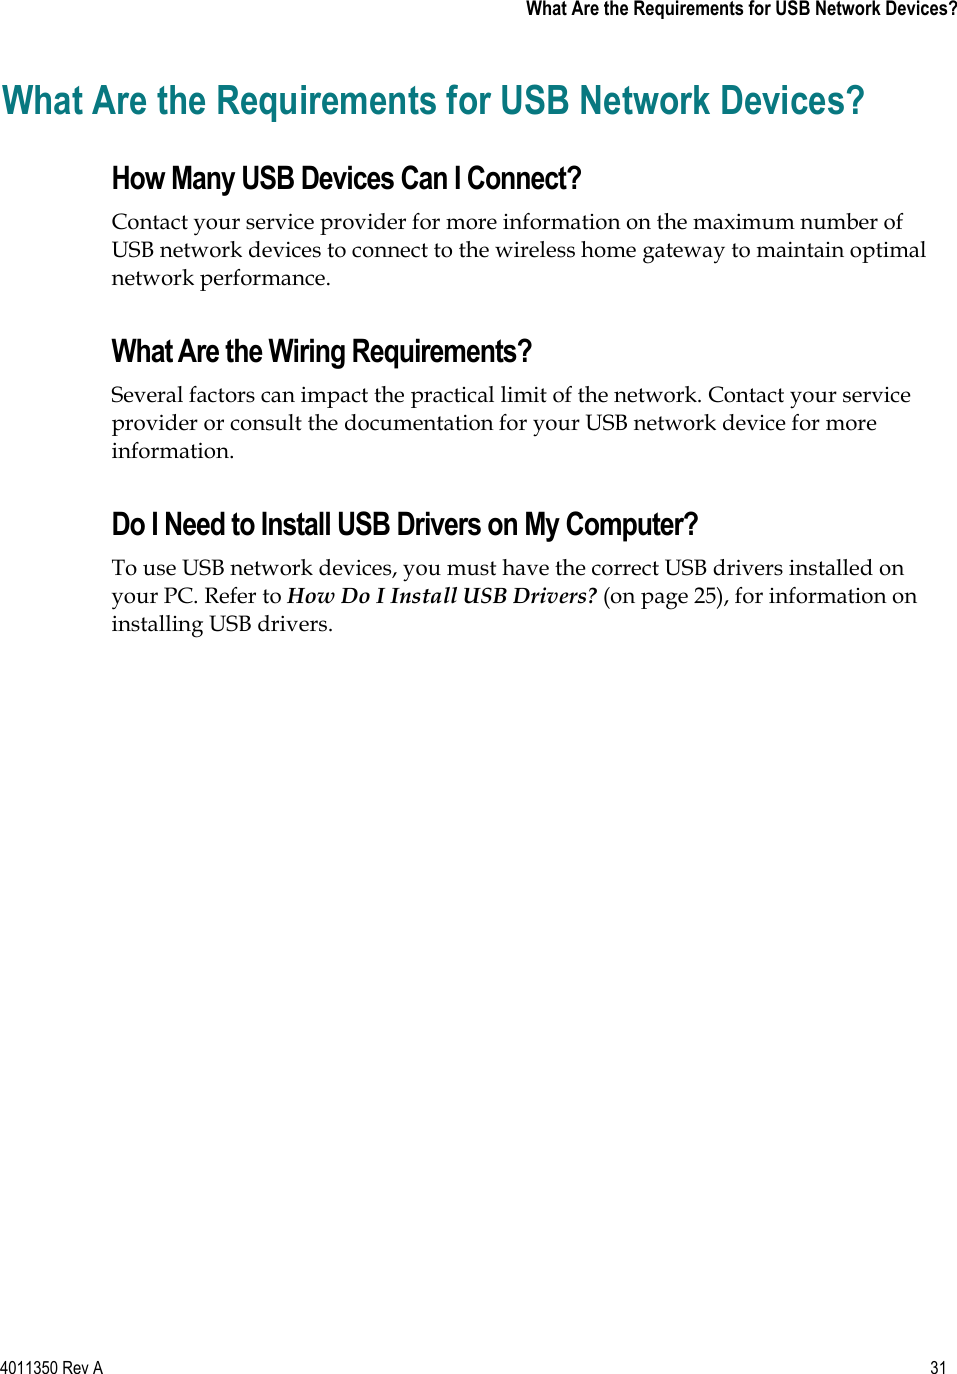 4011350 Rev A    31   What Are the Requirements for USB Network Devices?What Are the Requirements for USB Network Devices? How Many USB Devices Can I Connect? Contact your service provider for more information on the maximum number of USB network devices to connect to the wireless home gateway to maintain optimal network performance. What Are the Wiring Requirements? Several factors can impact the practical limit of the network. Contact your service provider or consult the documentation for your USB network device for more information.Do I Need to Install USB Drivers on My Computer? To use USB network devices, you must have the correct USB drivers installed on your PC. Refer to How Do I Install USB Drivers? (on page 25), for information on installing USB drivers. 